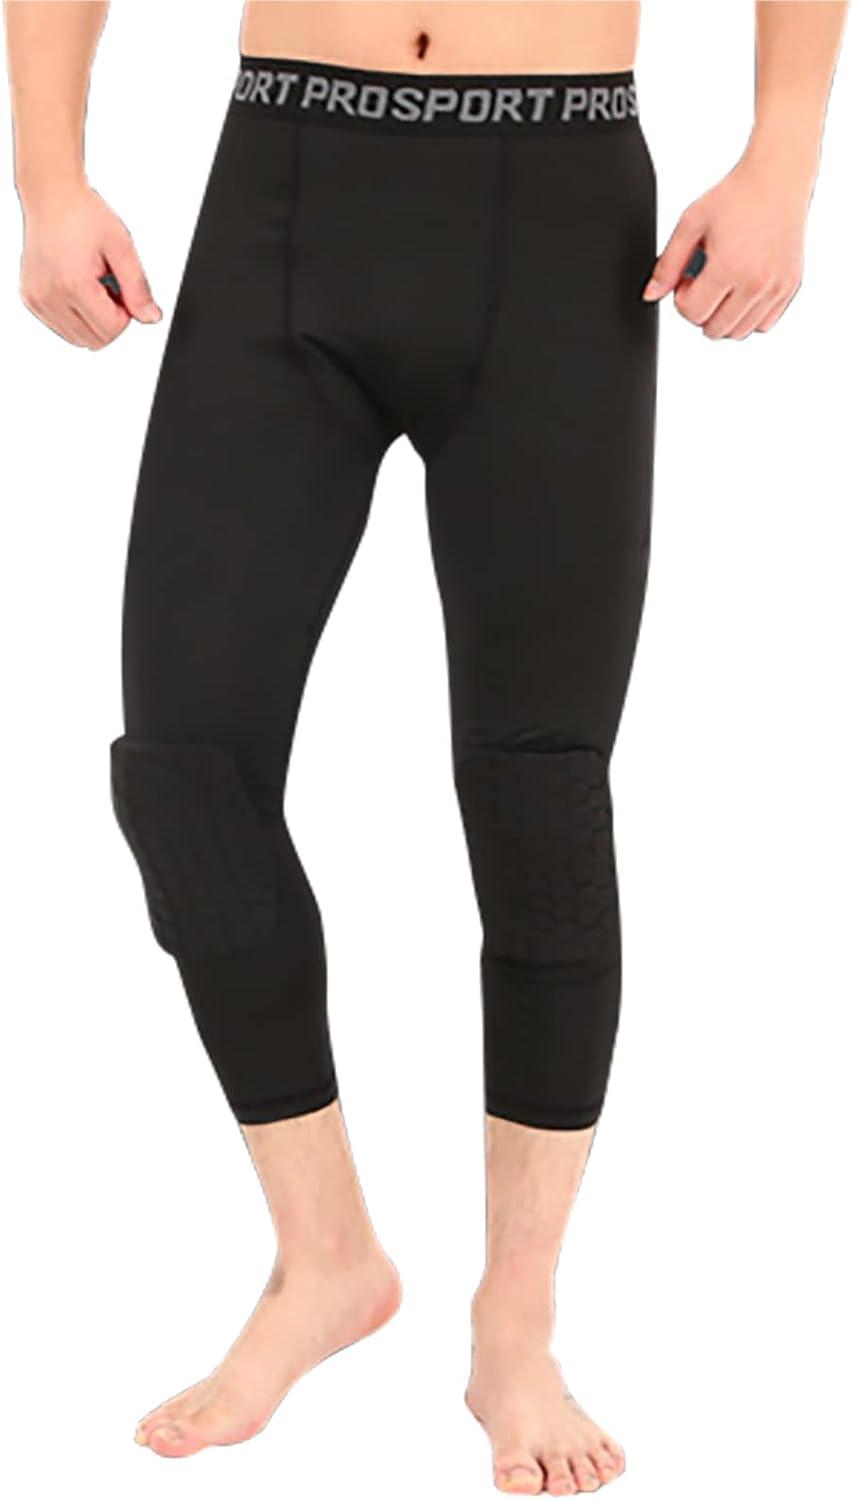  Men's Compression 3/4 Pants Athletic Baselayer Football Workout Legging  Running Tights Black : Clothing, Shoes & Jewelry